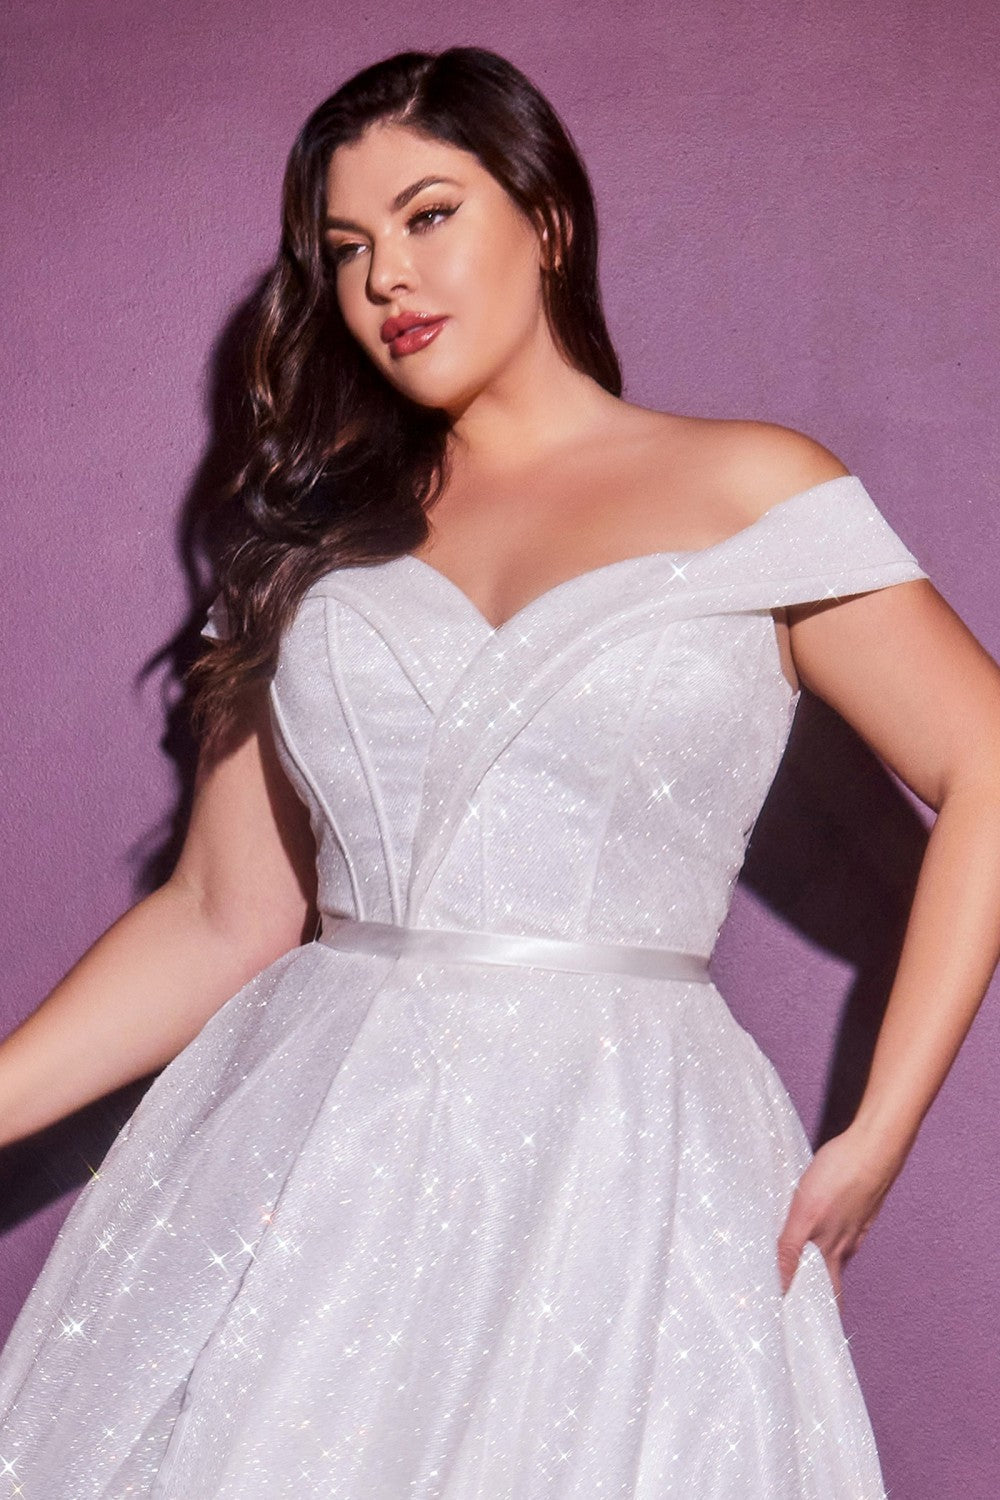 Glitter Off shoulder Bridal Plus Size Dress Structured Corset With Cap Sleeves Modern Curvy Wedding Gown Sexy Leg Slit CDCD214WC Elsy Style Wedding Dress